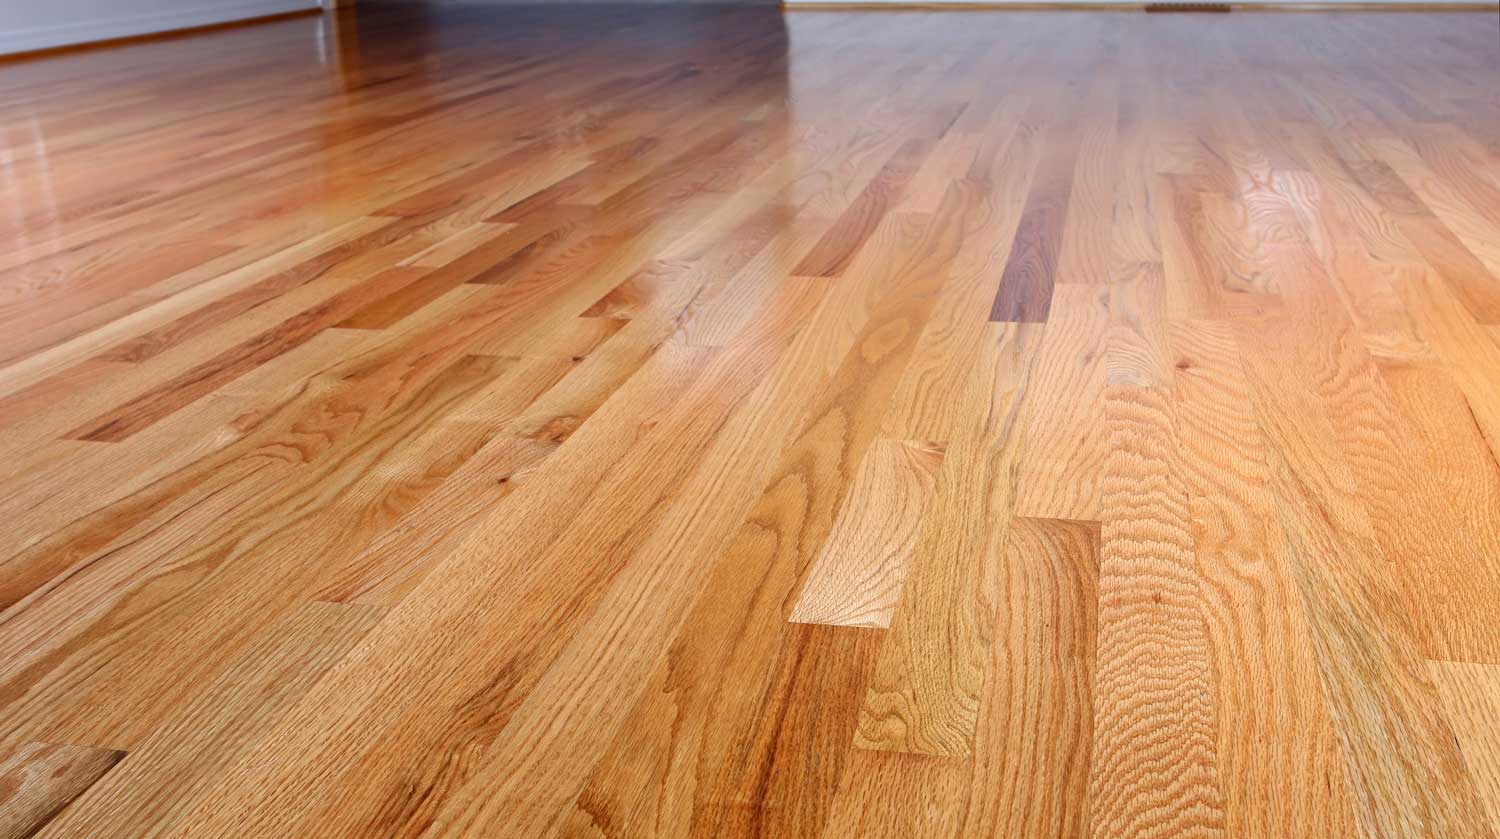 Cost To Refinish A Hardwood Floor, Average Cost To Have Hardwood Floors Refinished